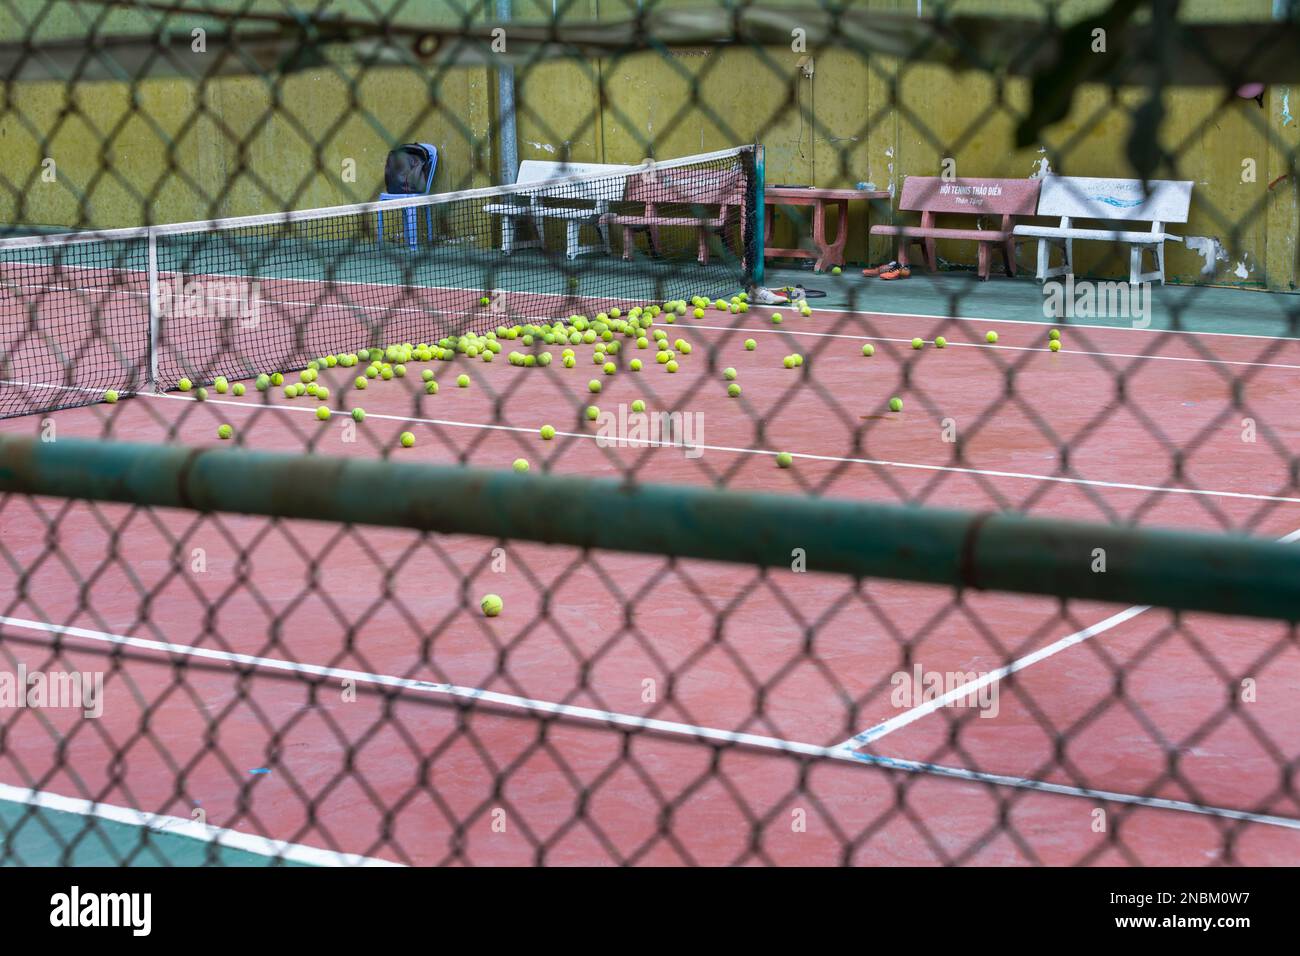 Tennis balls on a court in Thao Dien, District 2 in Ho Chi Minh City after a practice session Stock Photo